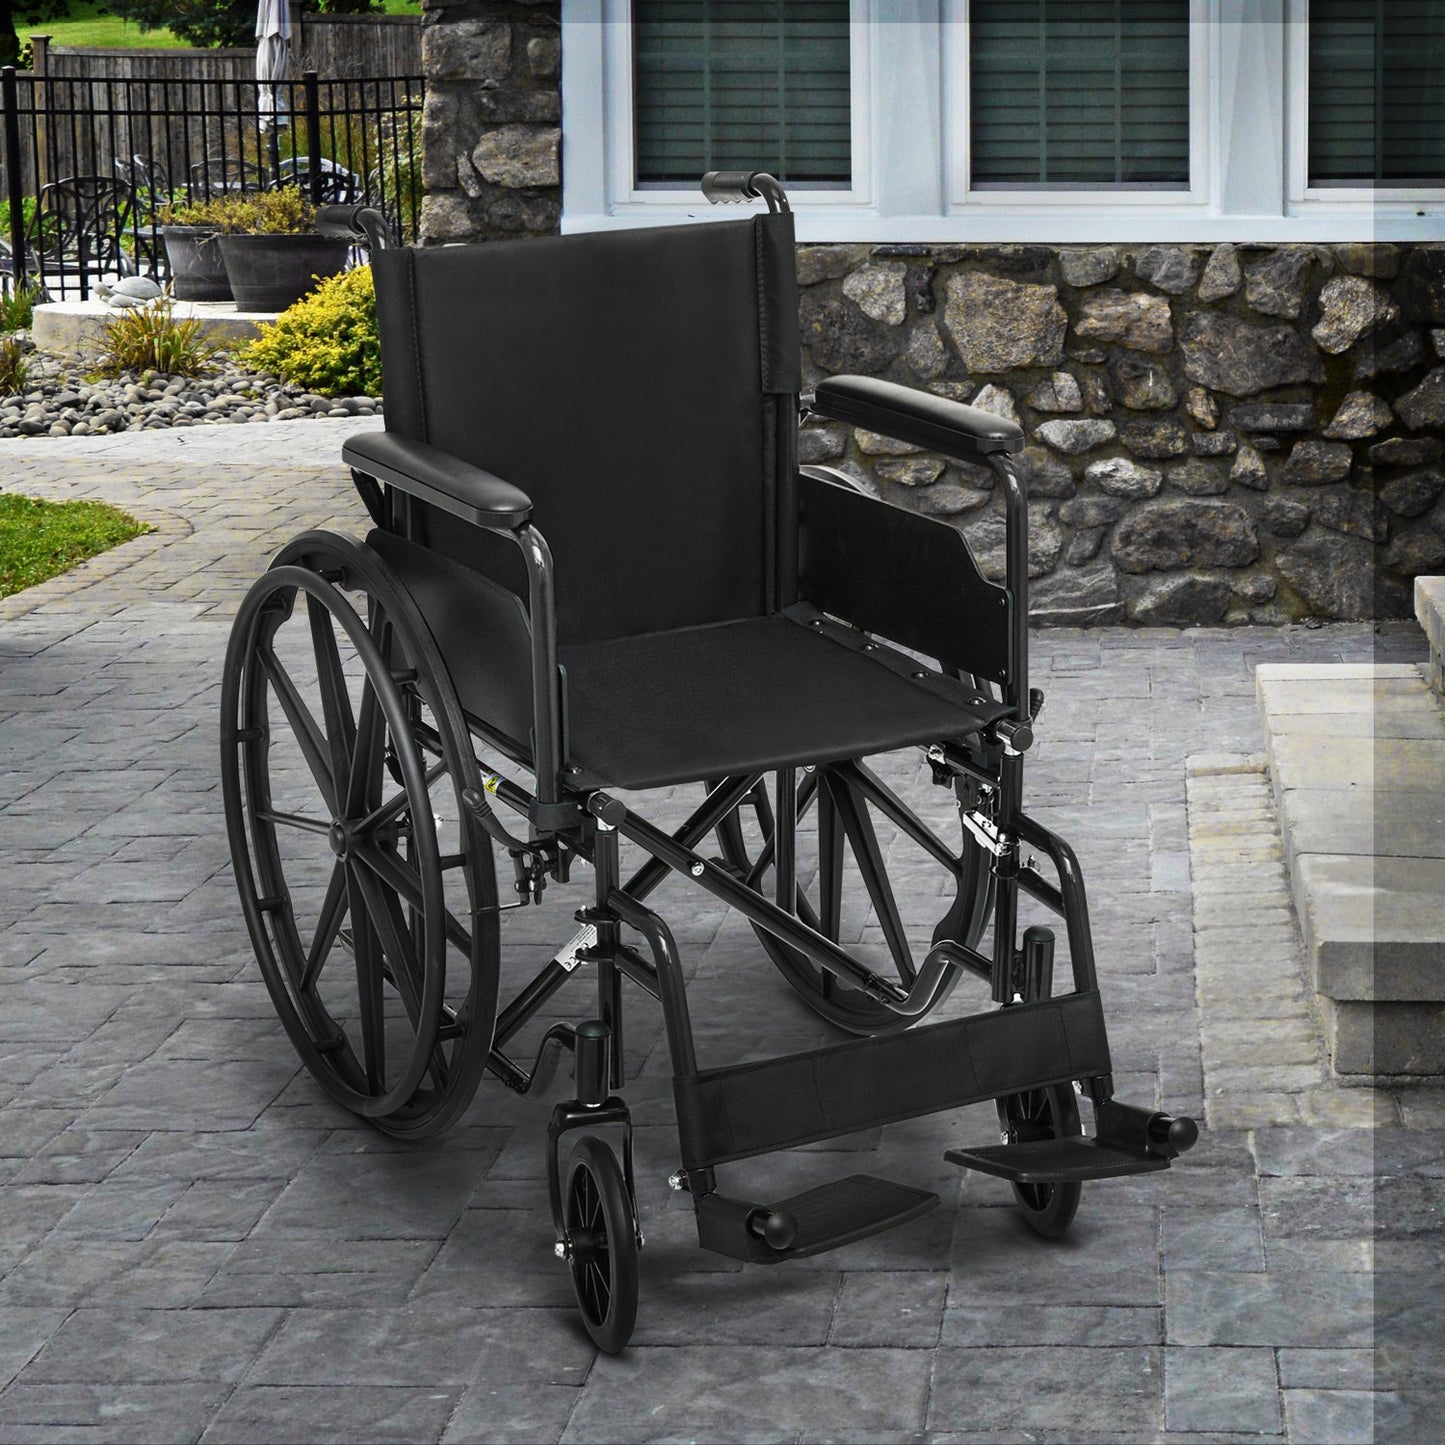 Manual Wheelchair -  Black, FDA Approved - 18"x16" Seat